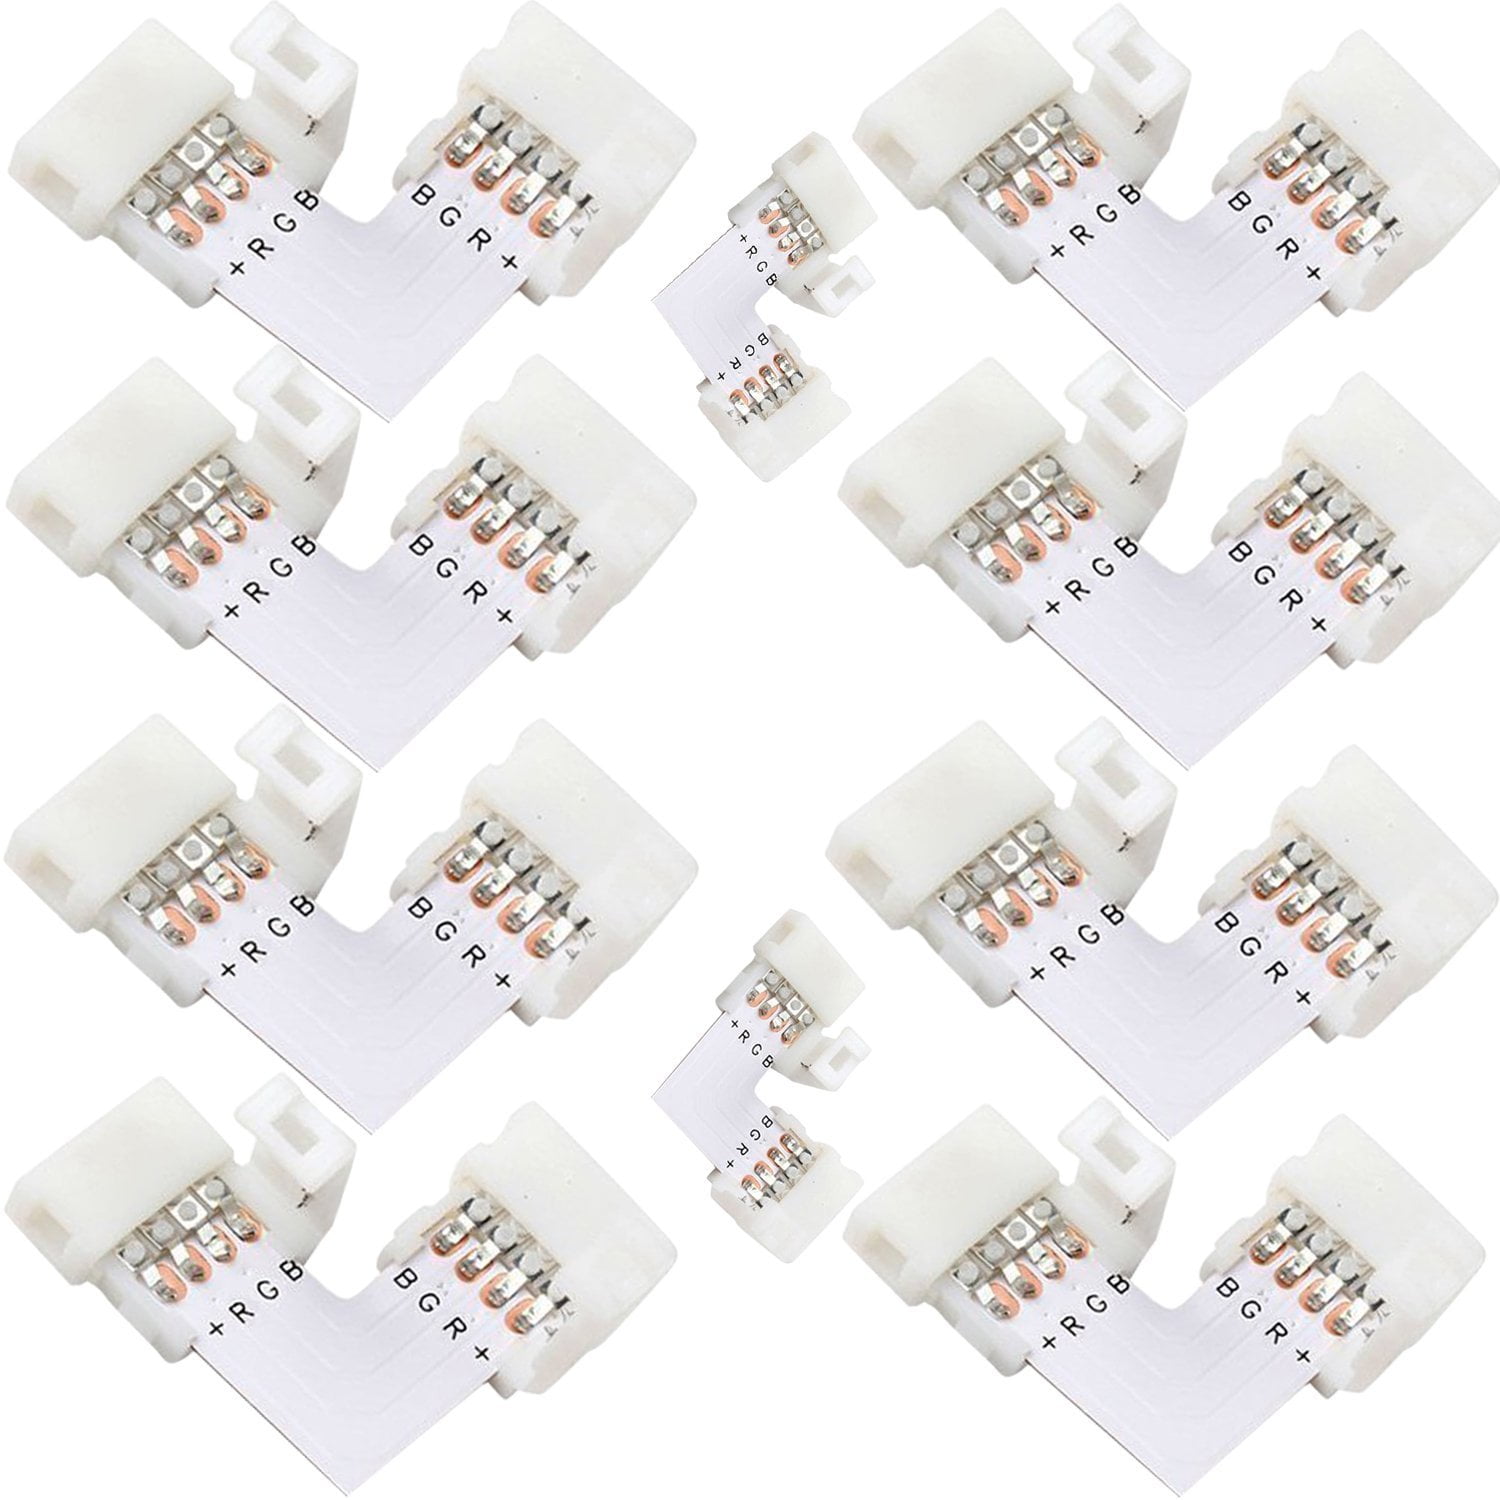 LED Strip Connector L Shape 10 Pcs JACKYLED 4 Pins 10mm PBT Non-waterproof Quick Splitter Right Angle Corner Connector for 5050 3528 SMD RGB 4 Conductor LED Strip Lights Strip to Strip 